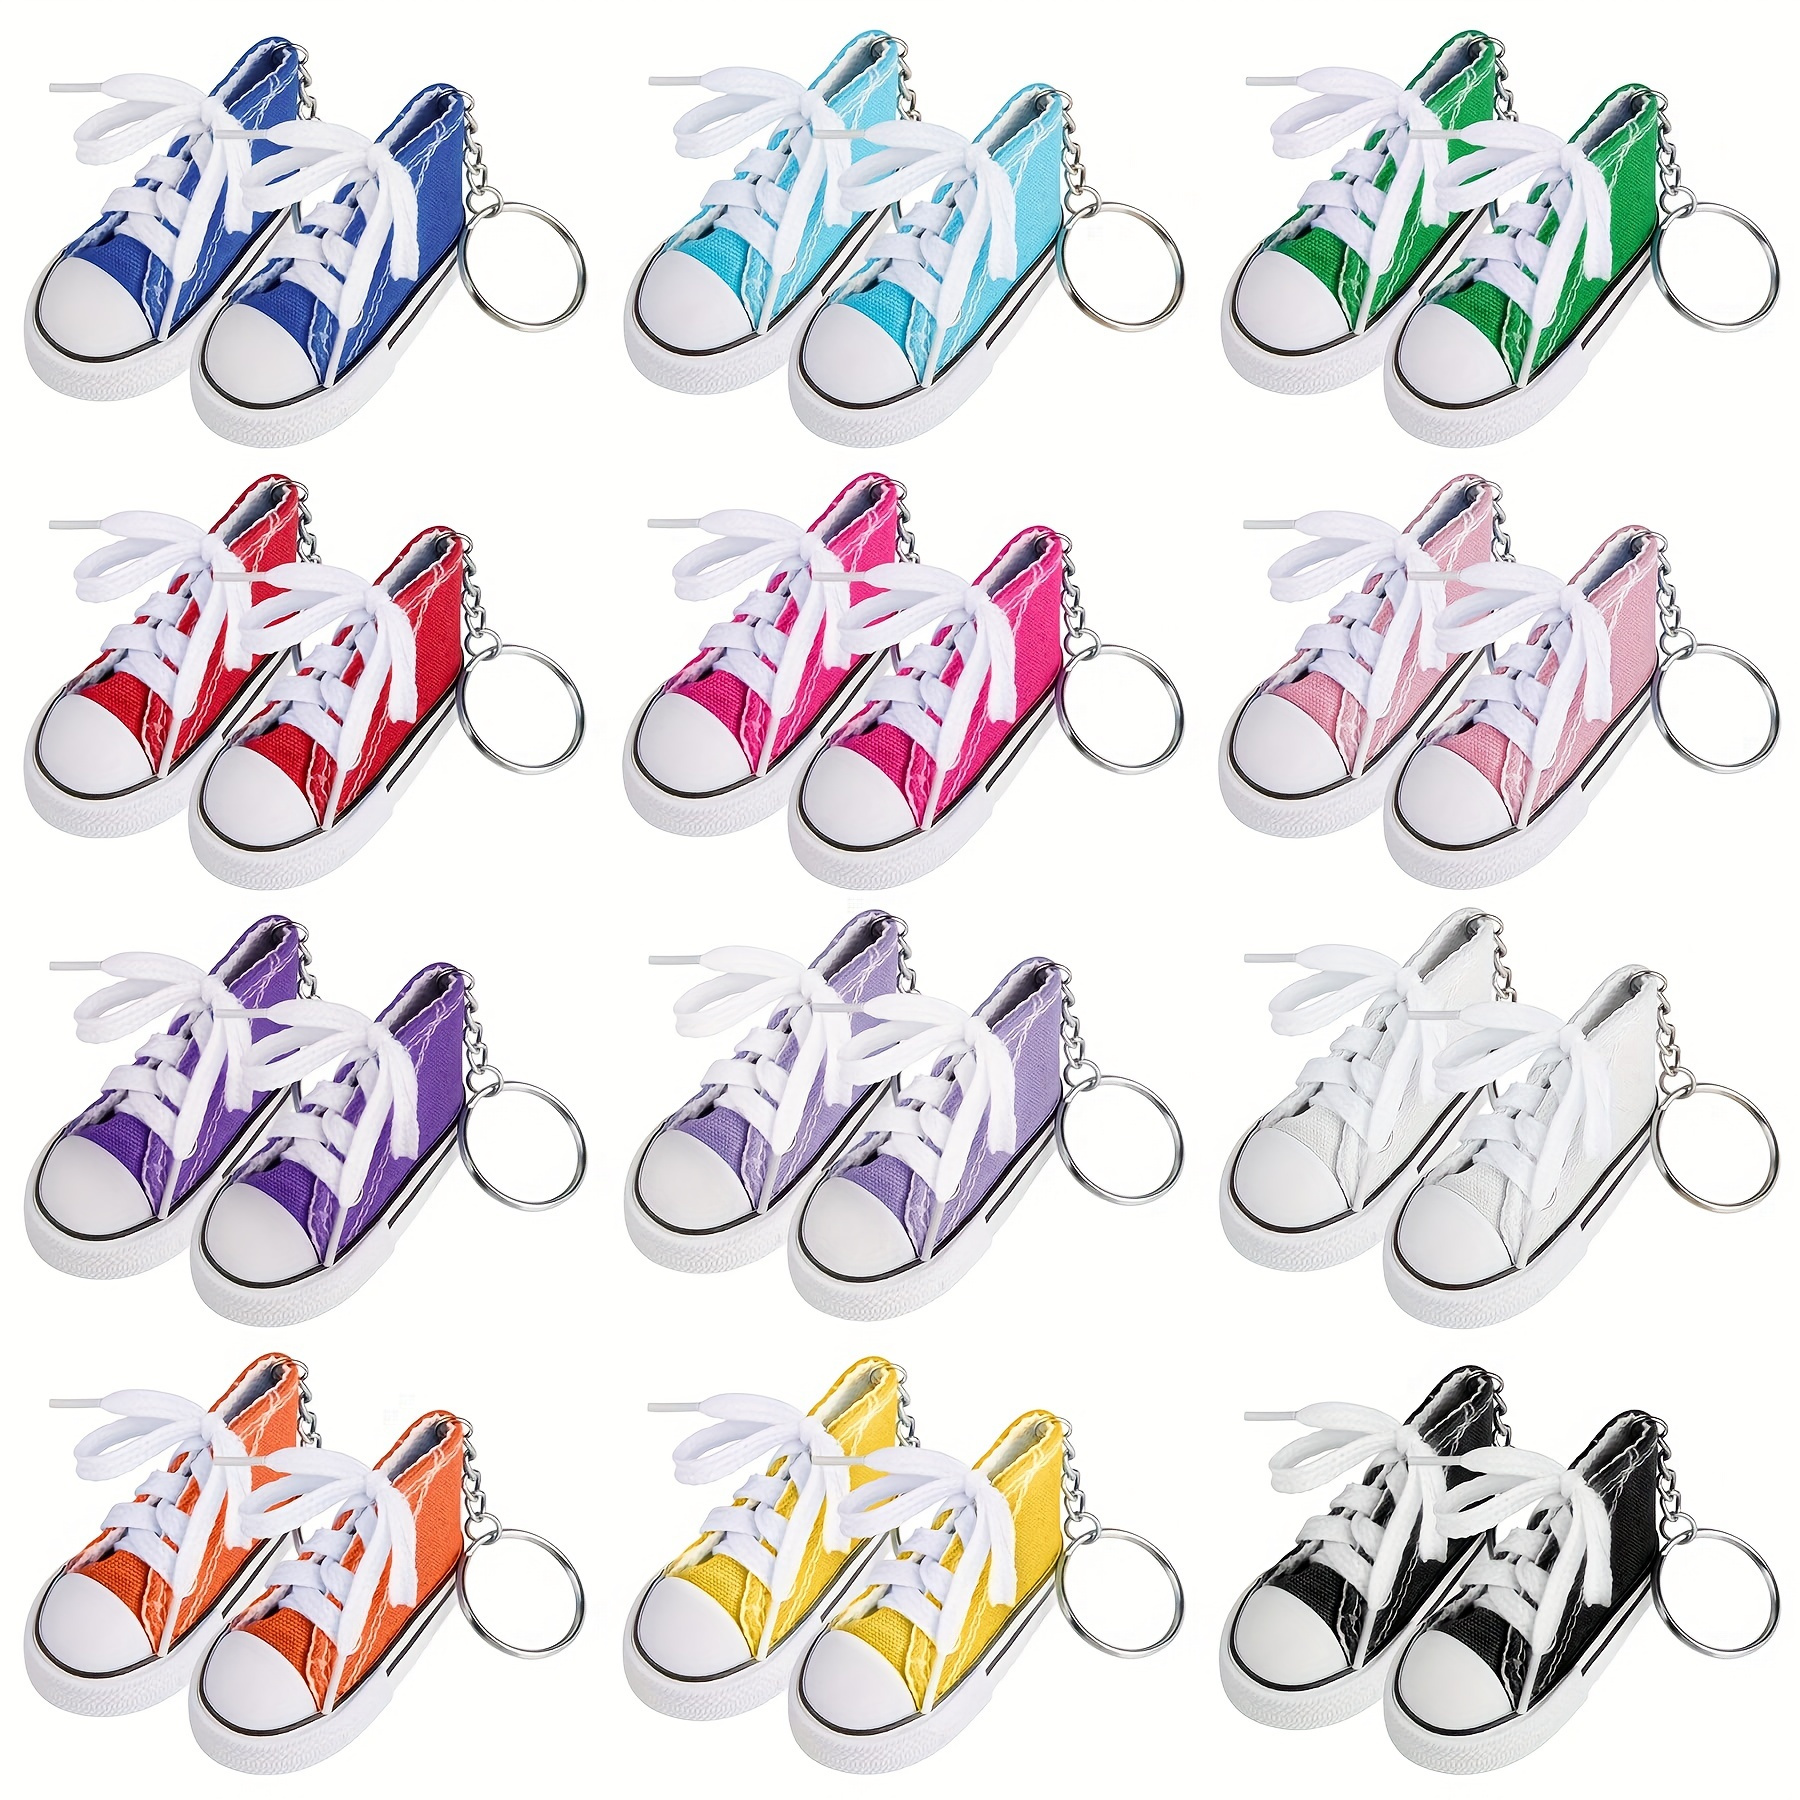 Exquisite Sneakers Key Chain Gift Customized 3D Mini Sports Shoes Keychain  Model Basketball Fans Souvenir Phone Fashion Pendant